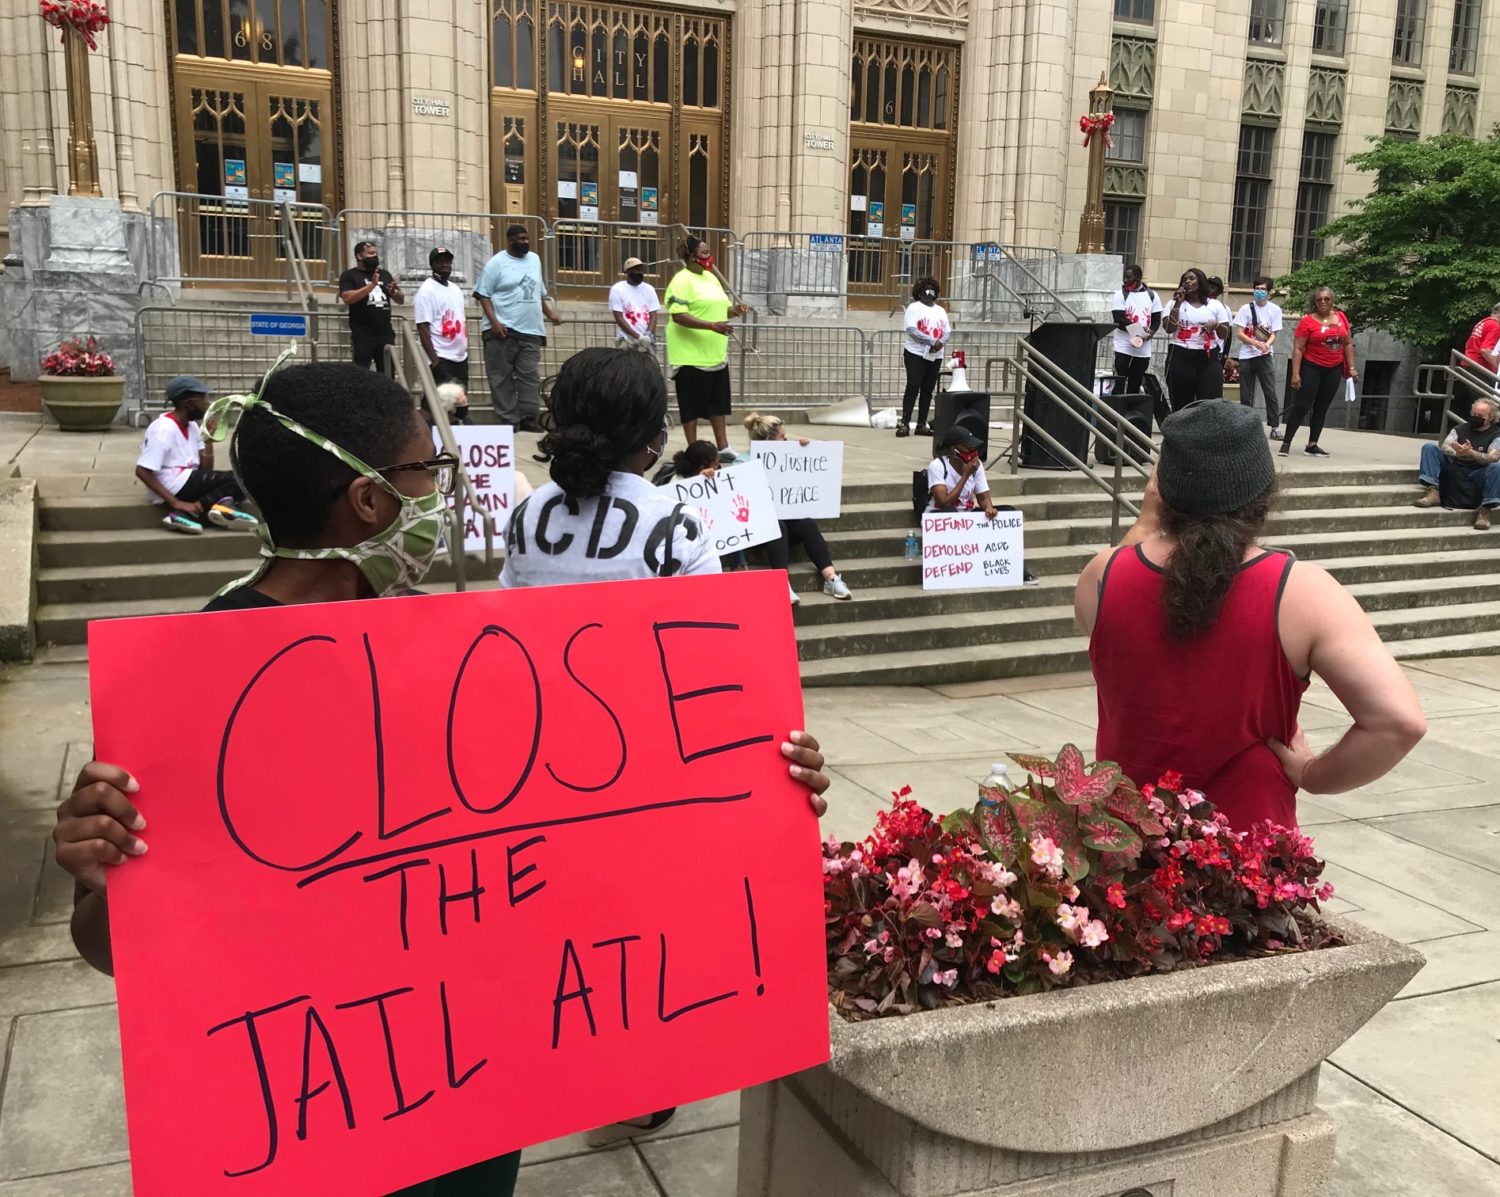 A small rally on the steps of Atlanta City Hall. A person holds a sign that says Close the ATL Jail